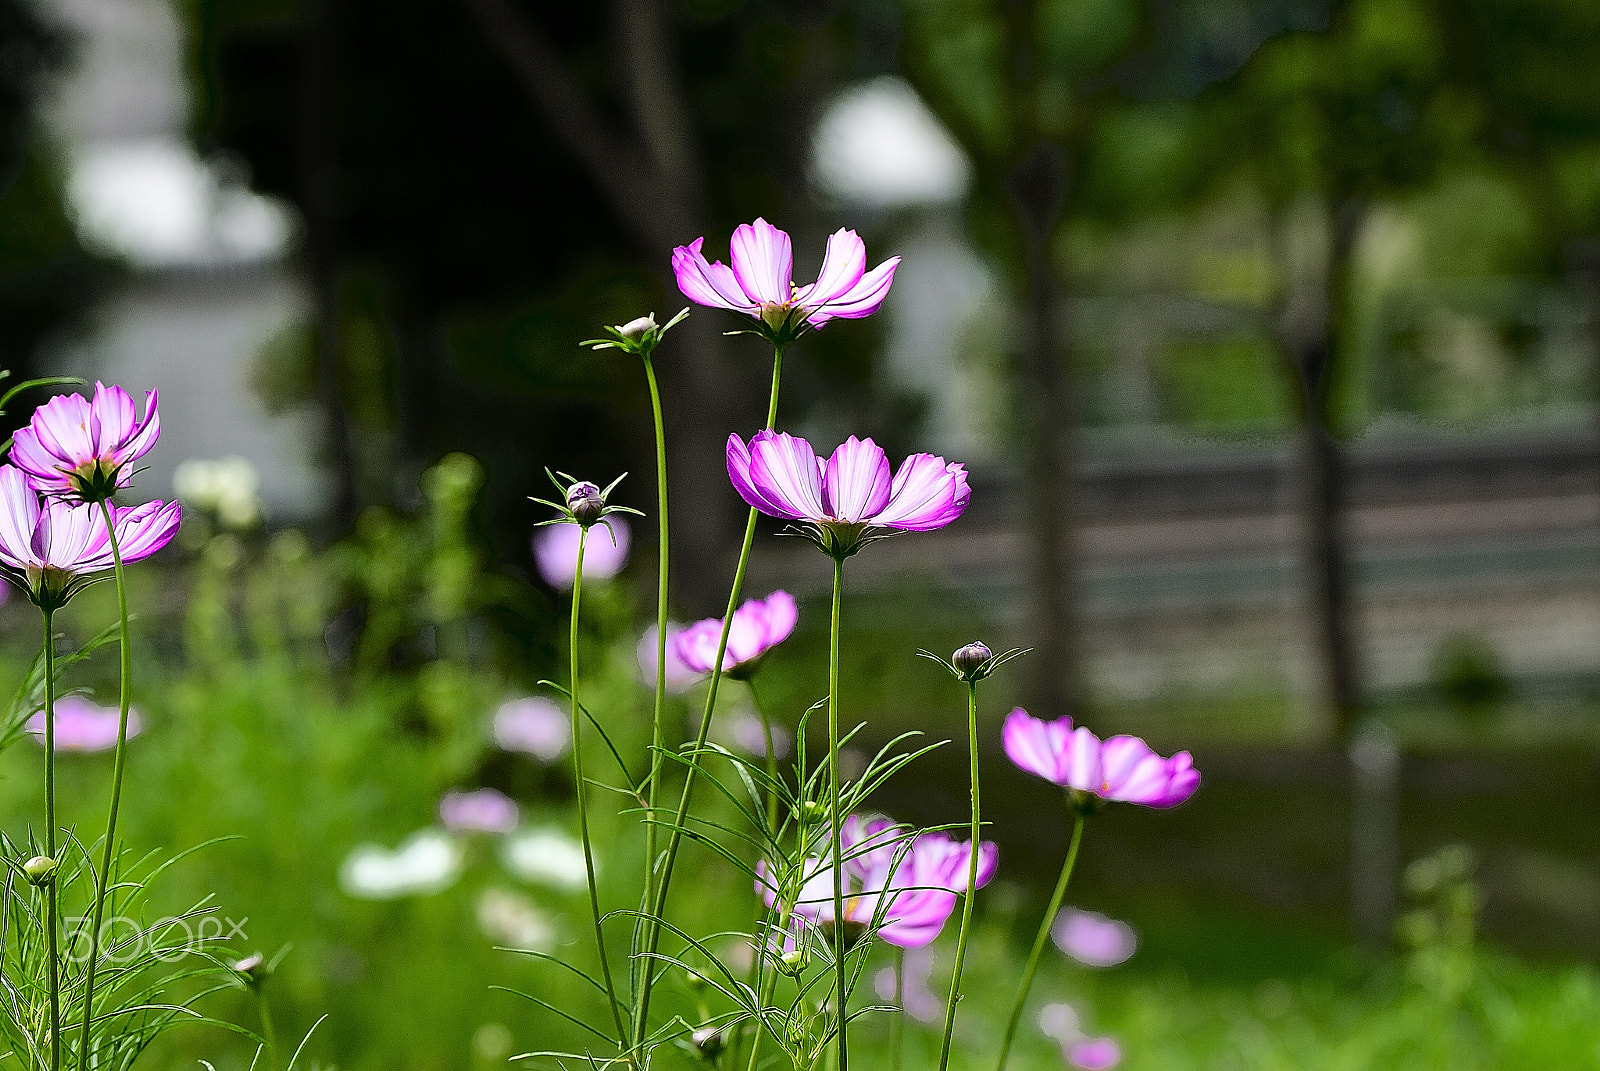 Nikon D200 + Nikon AF-S Micro-Nikkor 105mm F2.8G IF-ED VR sample photo. White framed in pale purple cosmos photography